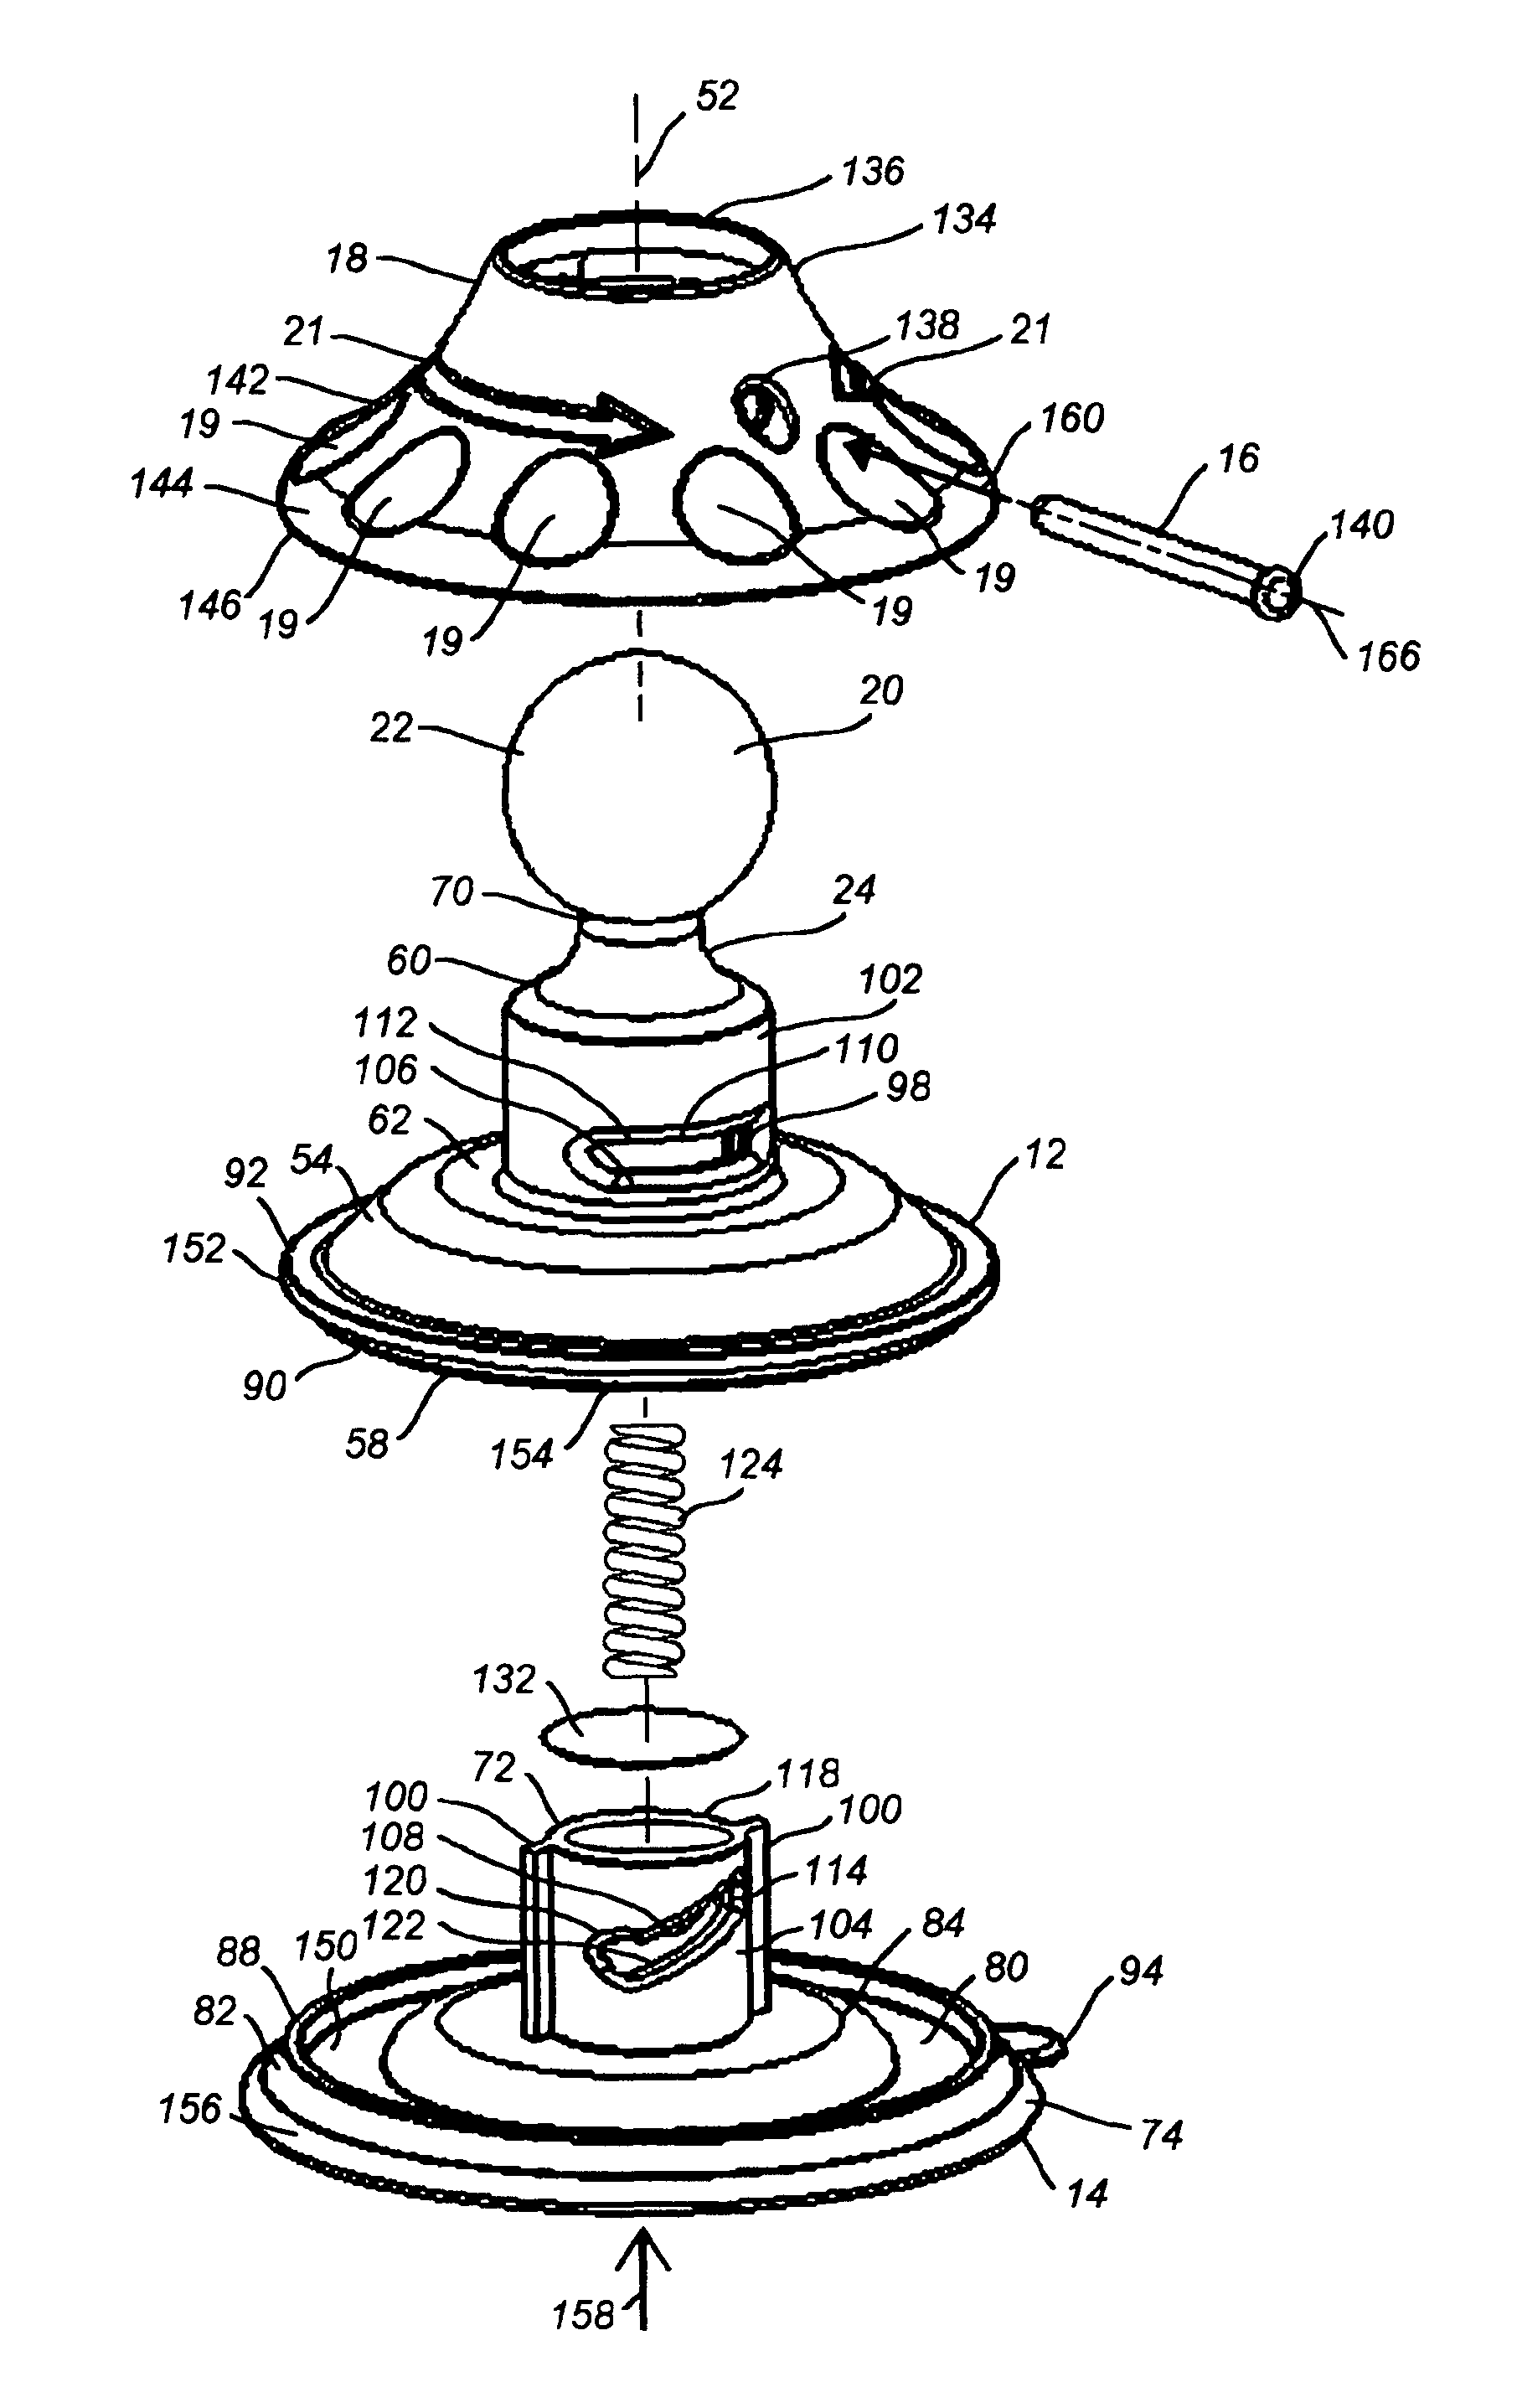 Suction cup having compact axial installation and release mechanism